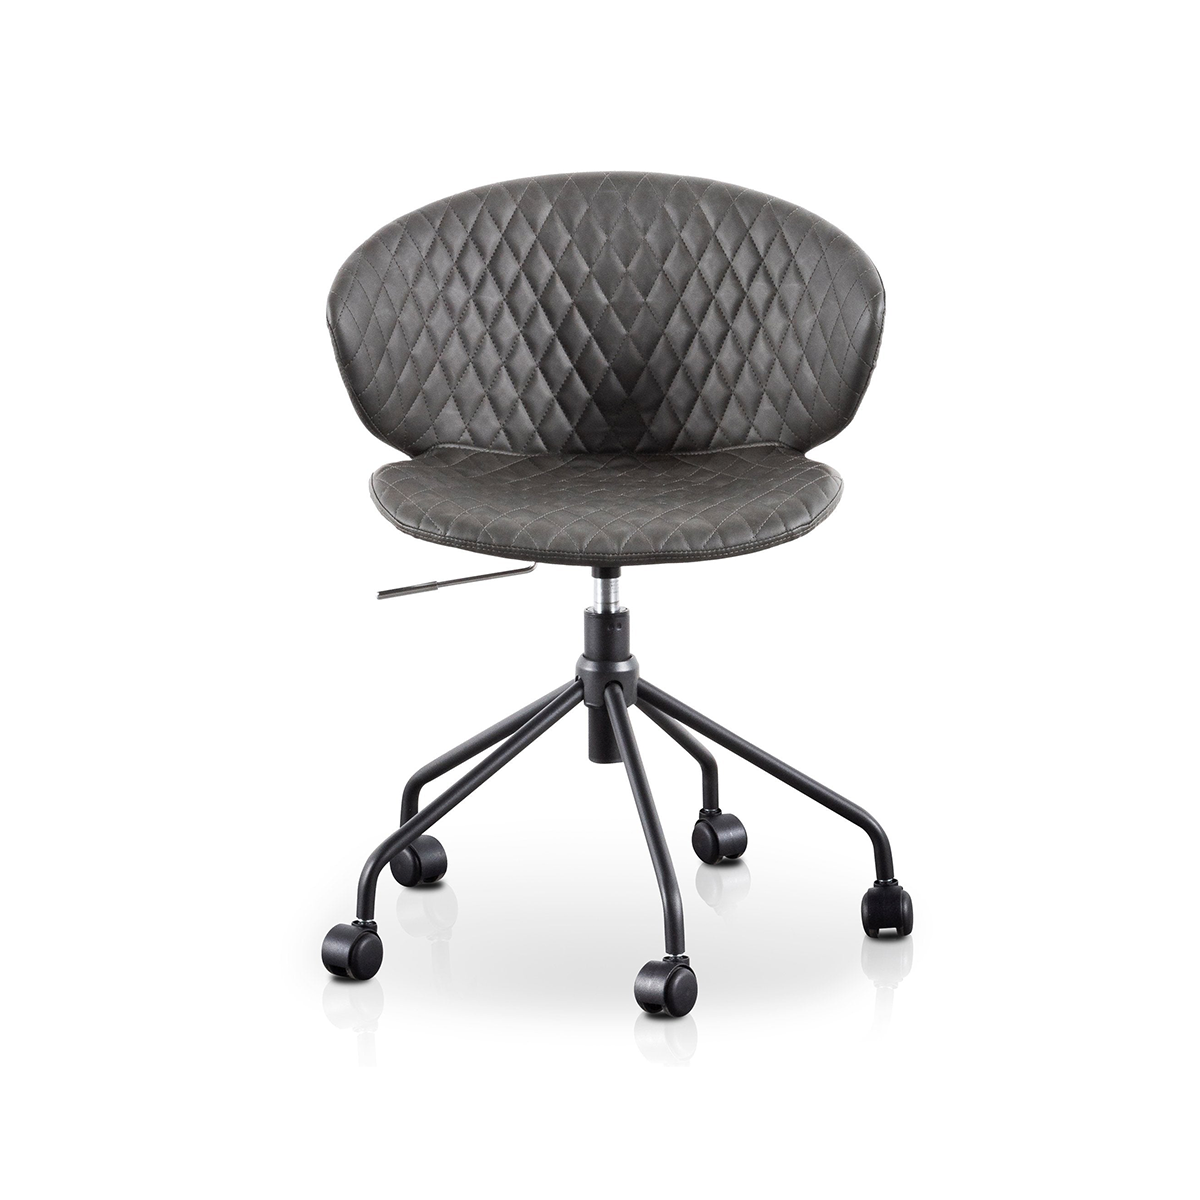 FondHouse Feixi Office Chair - Charcoal with Black Base